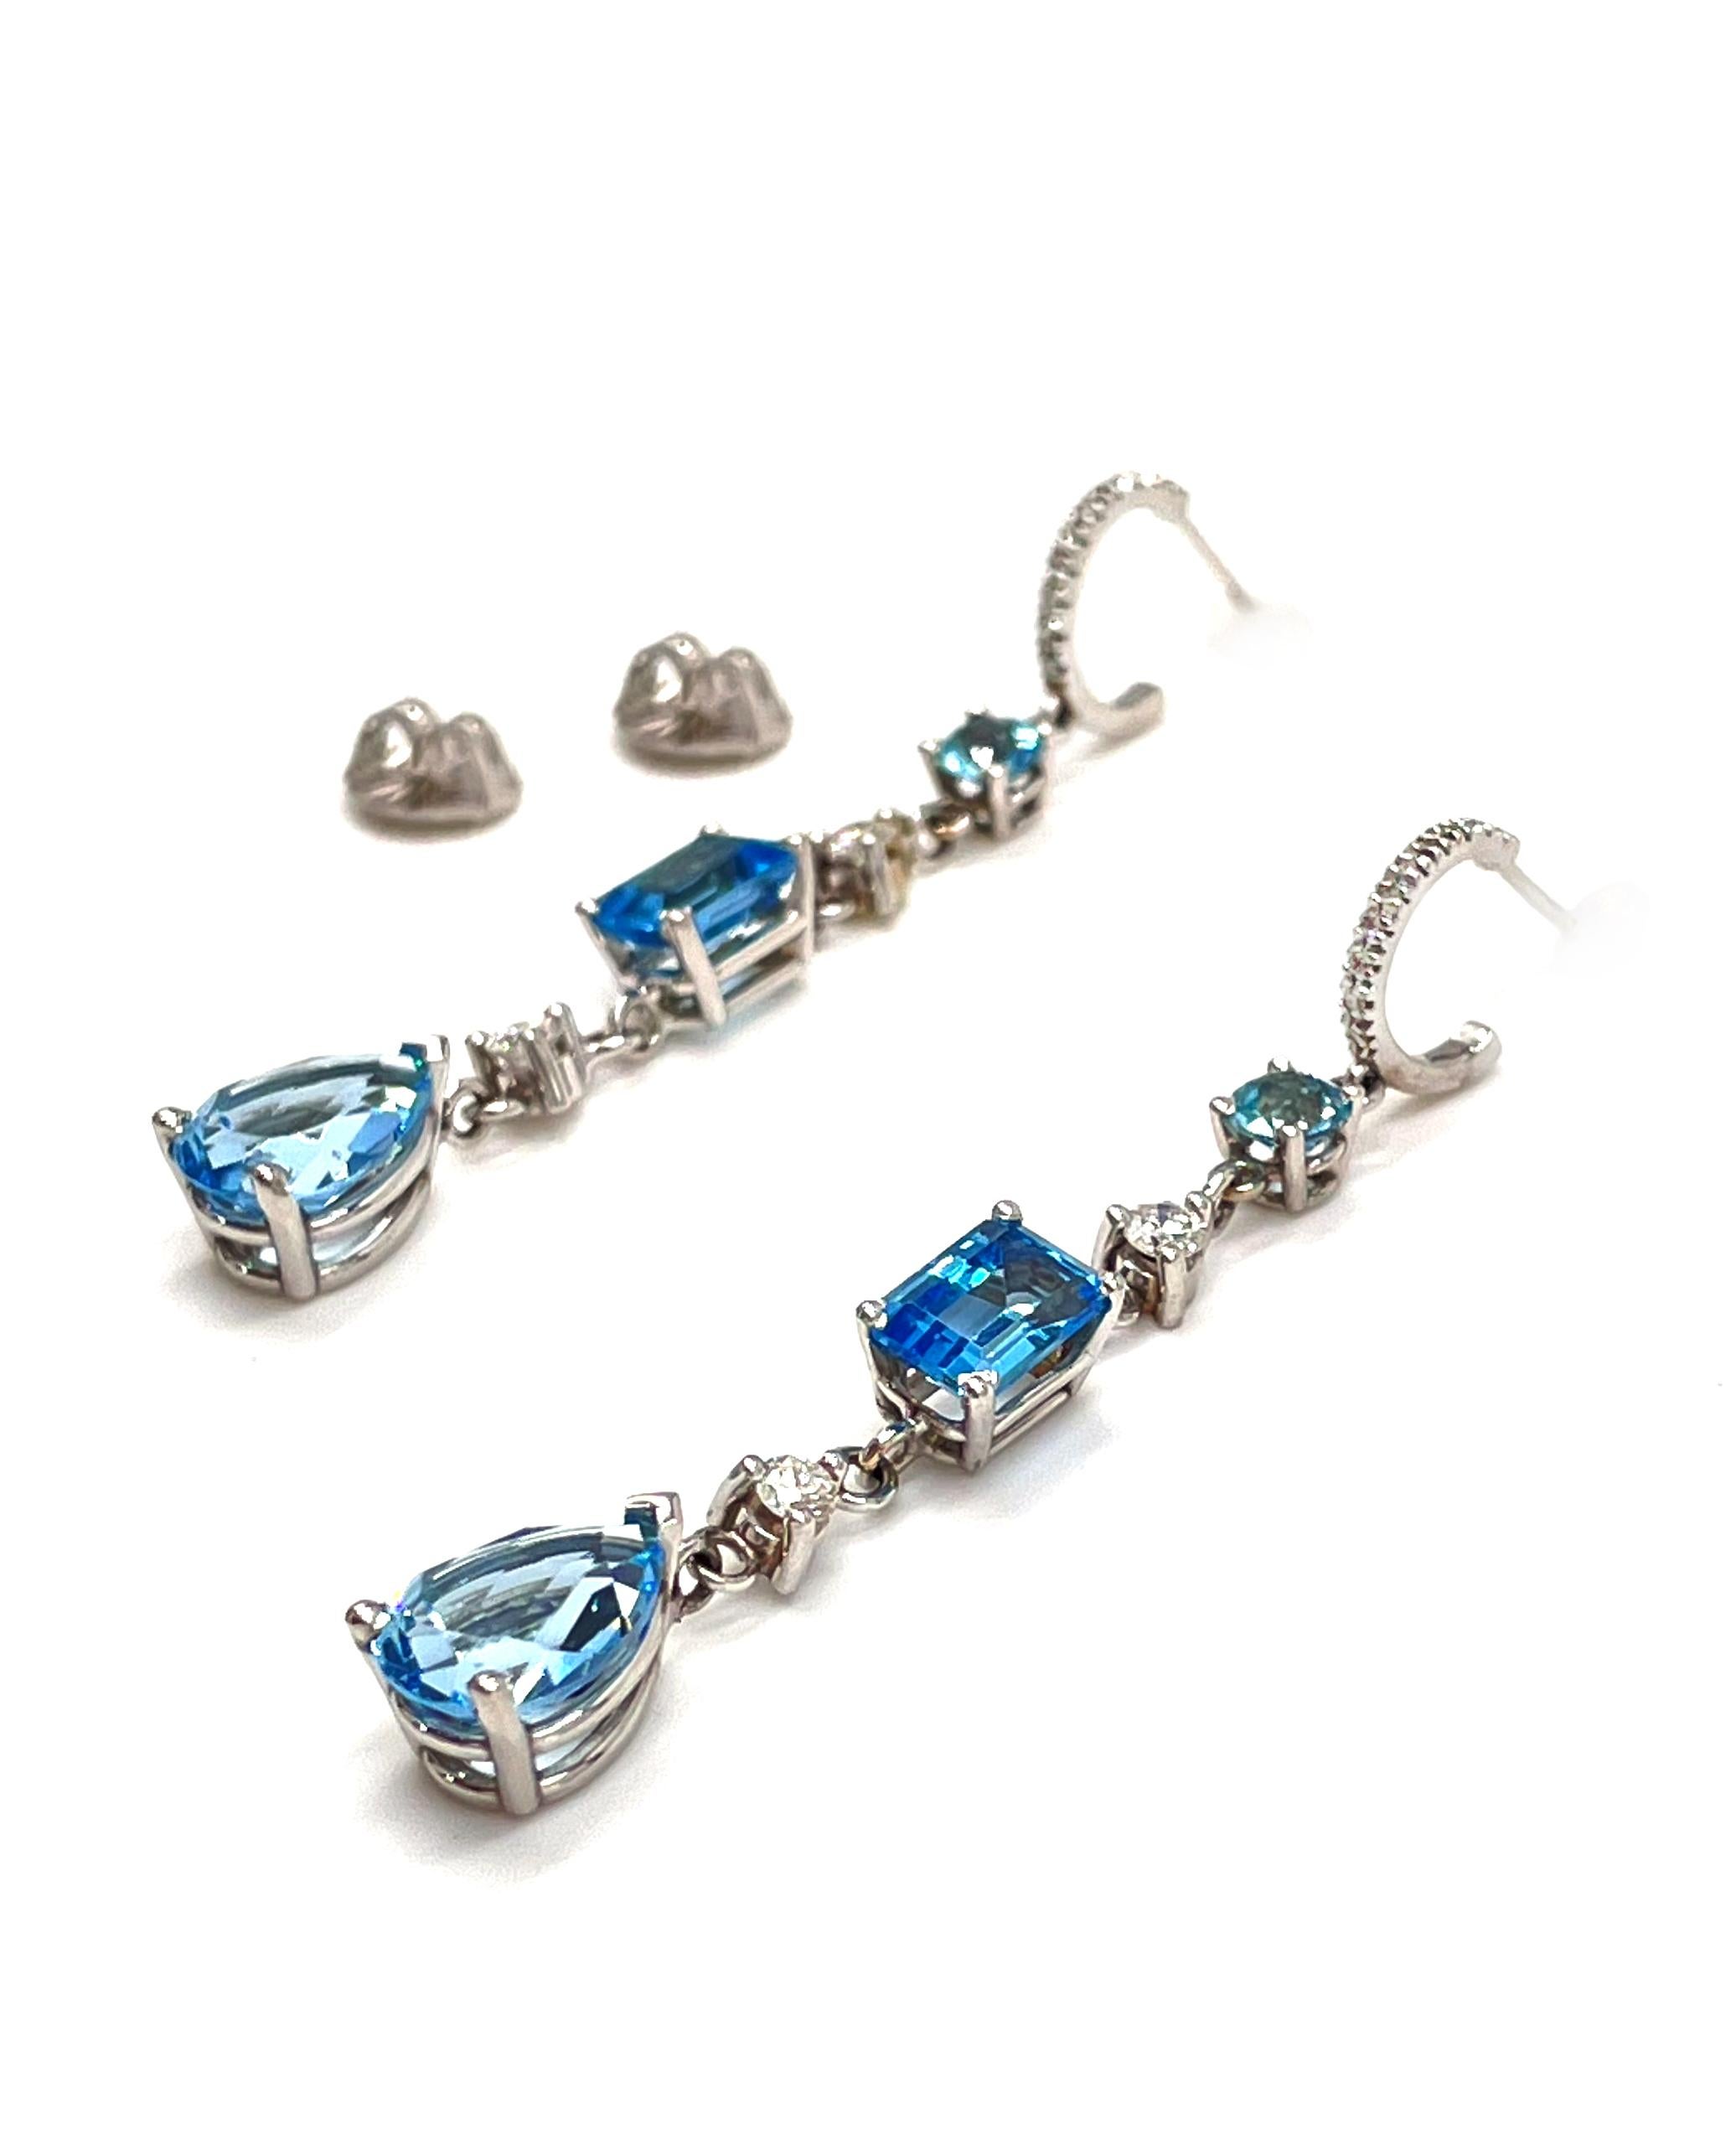 Pair of 14K white gold long dangling earrings with round brilliant-cut diamonds weighing 0.20 carats total and 6 fancy shaped blue topaz weighing 6.91 carats total weight.

- Blue topaz stones are round, emerald cut and pear shaped.
- Friction backs